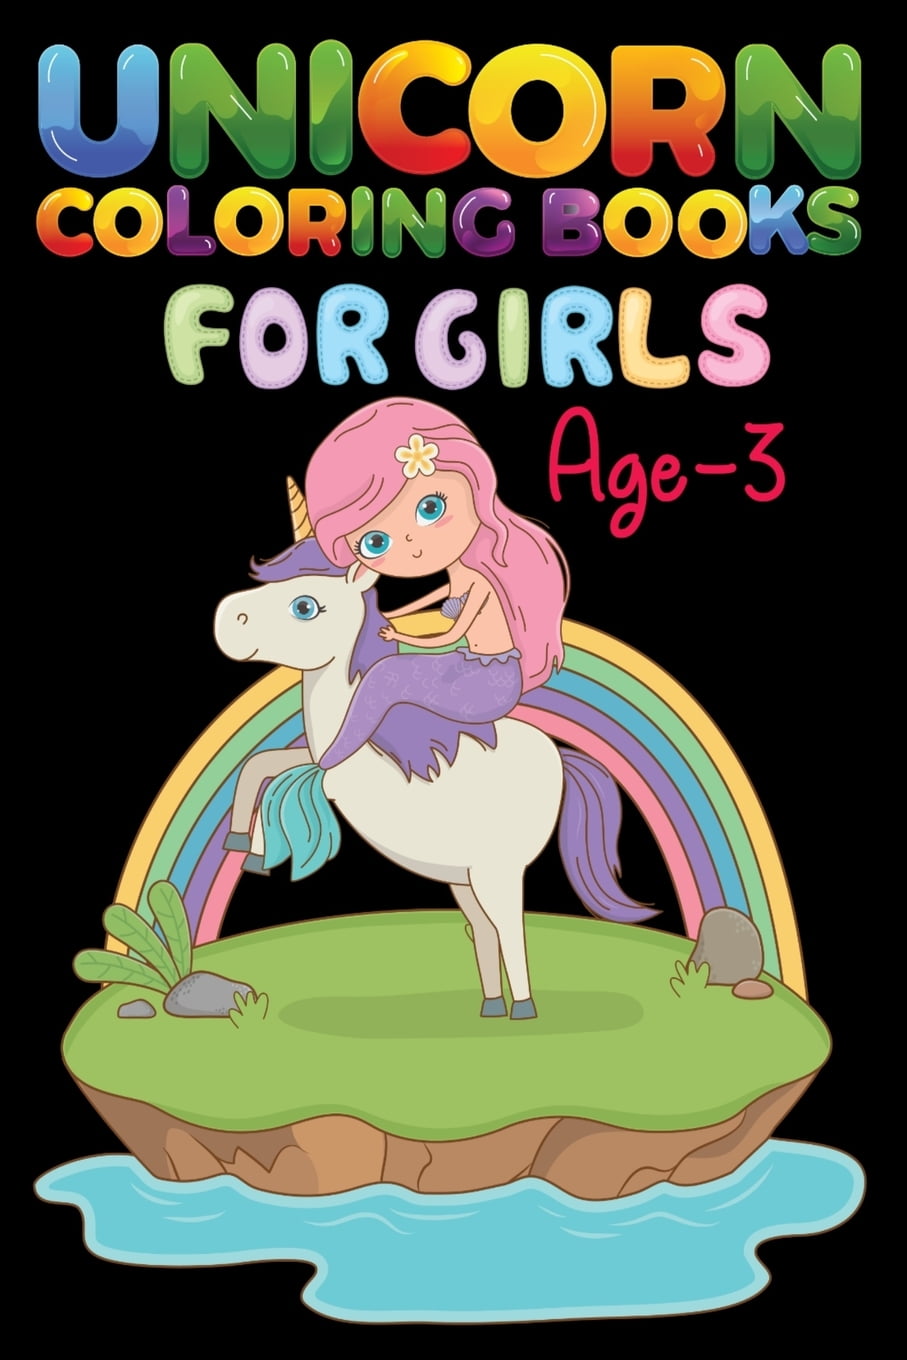 Unicorn Coloring Books For Girls Age 3  Cute Fun Playtime with Unicorn ...